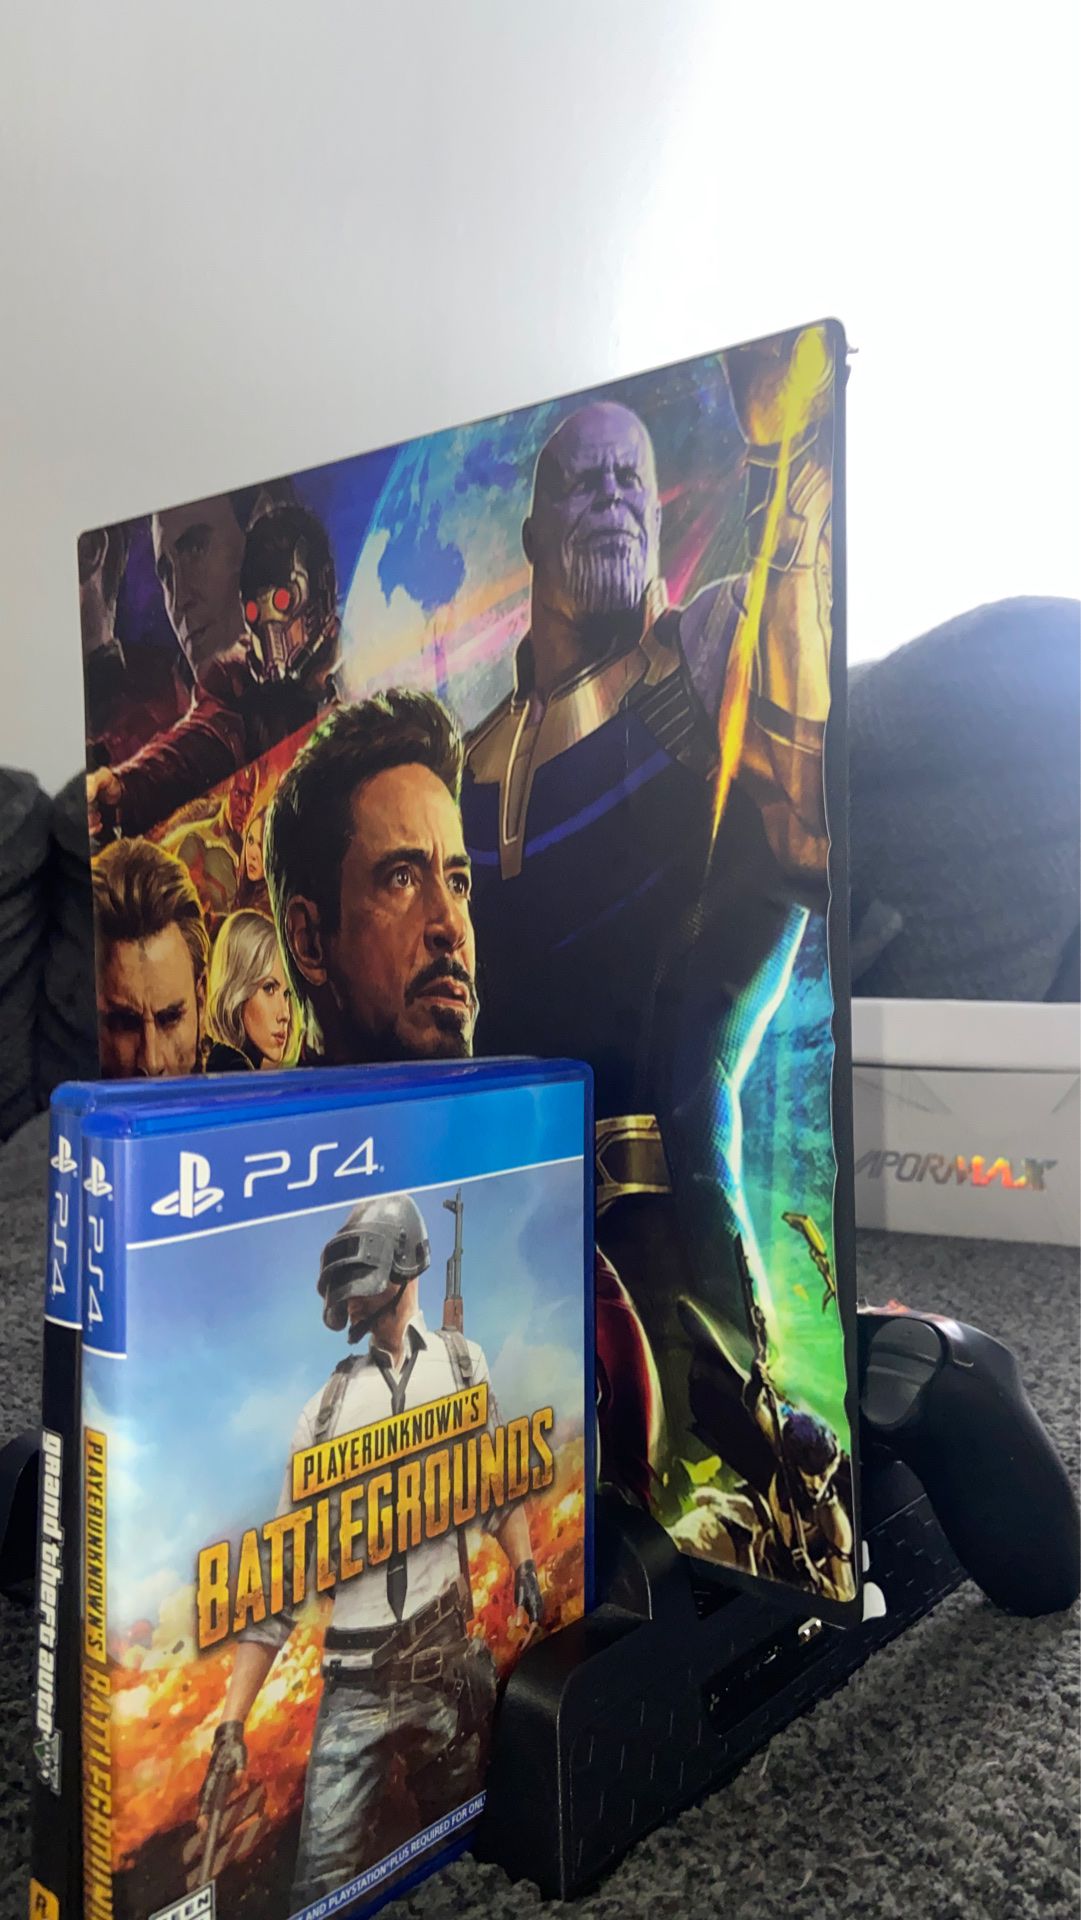 PS4 Pro TB, Vertical Stand with Dual Fans, 1 Original Controller and 2 Games “GTA 5 & PUBG”